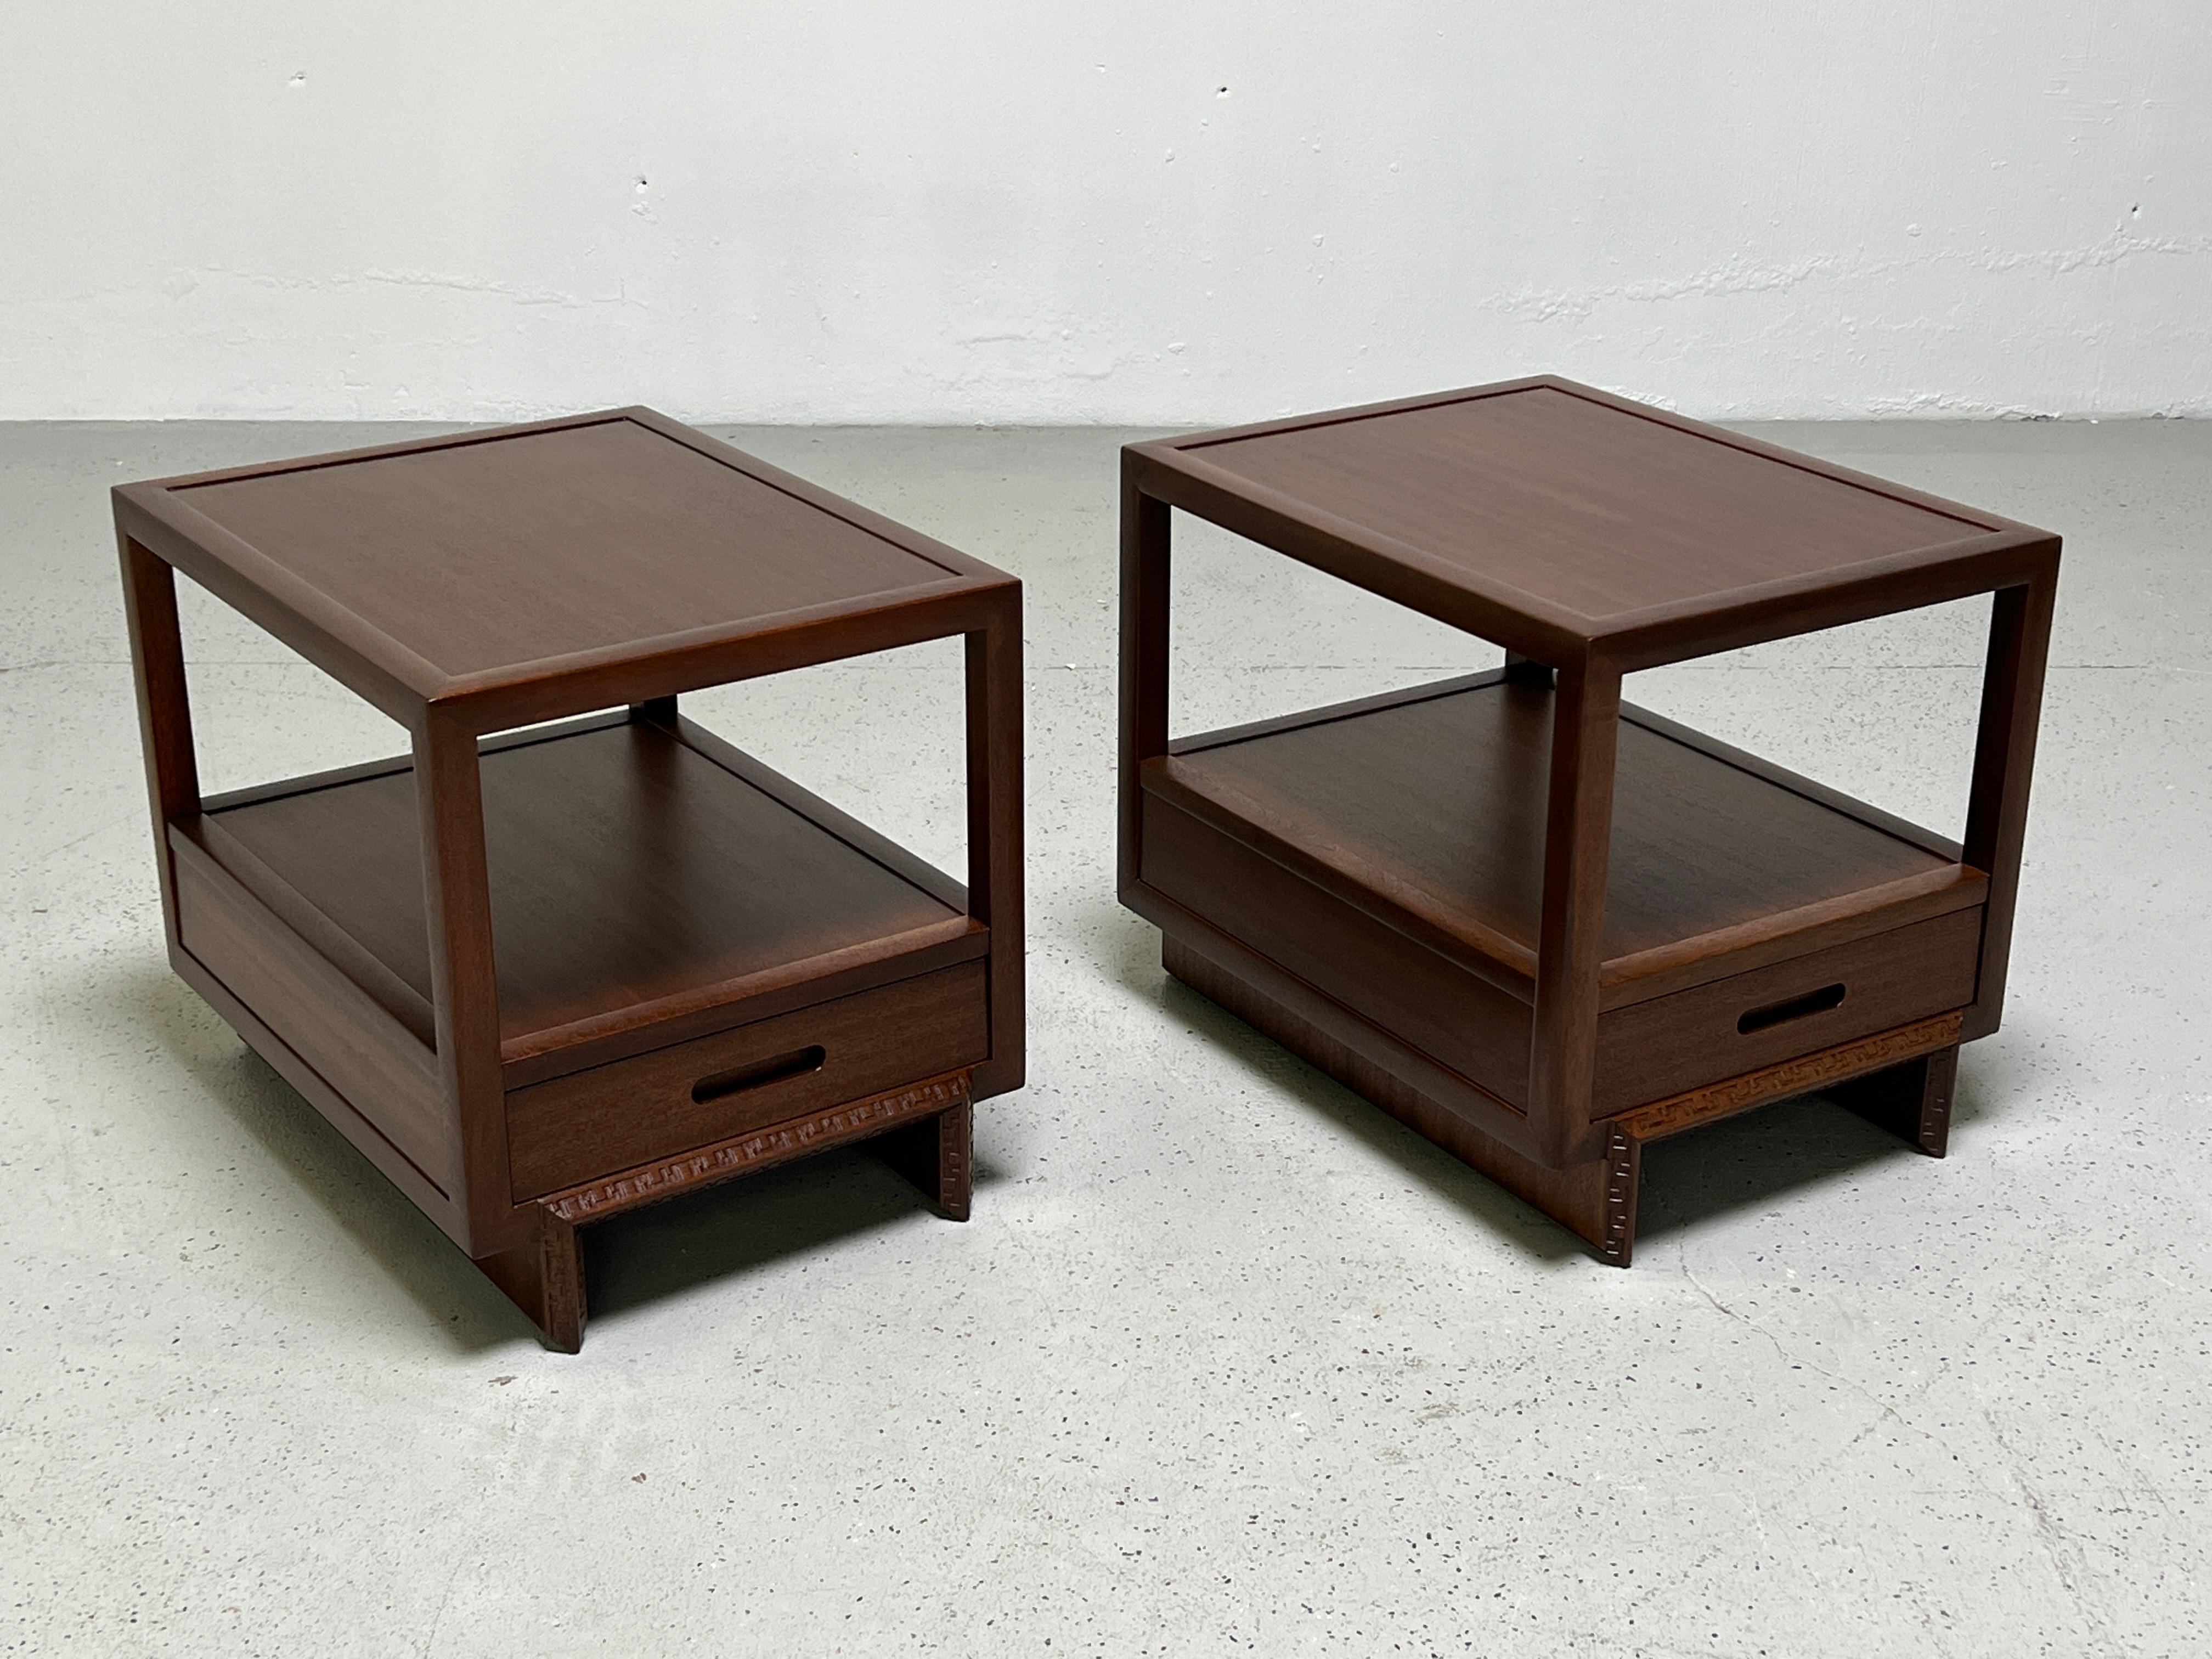 A pair of mahogany 'Taliesin' nightstands by Frank Lloyd Wright for Henredon.